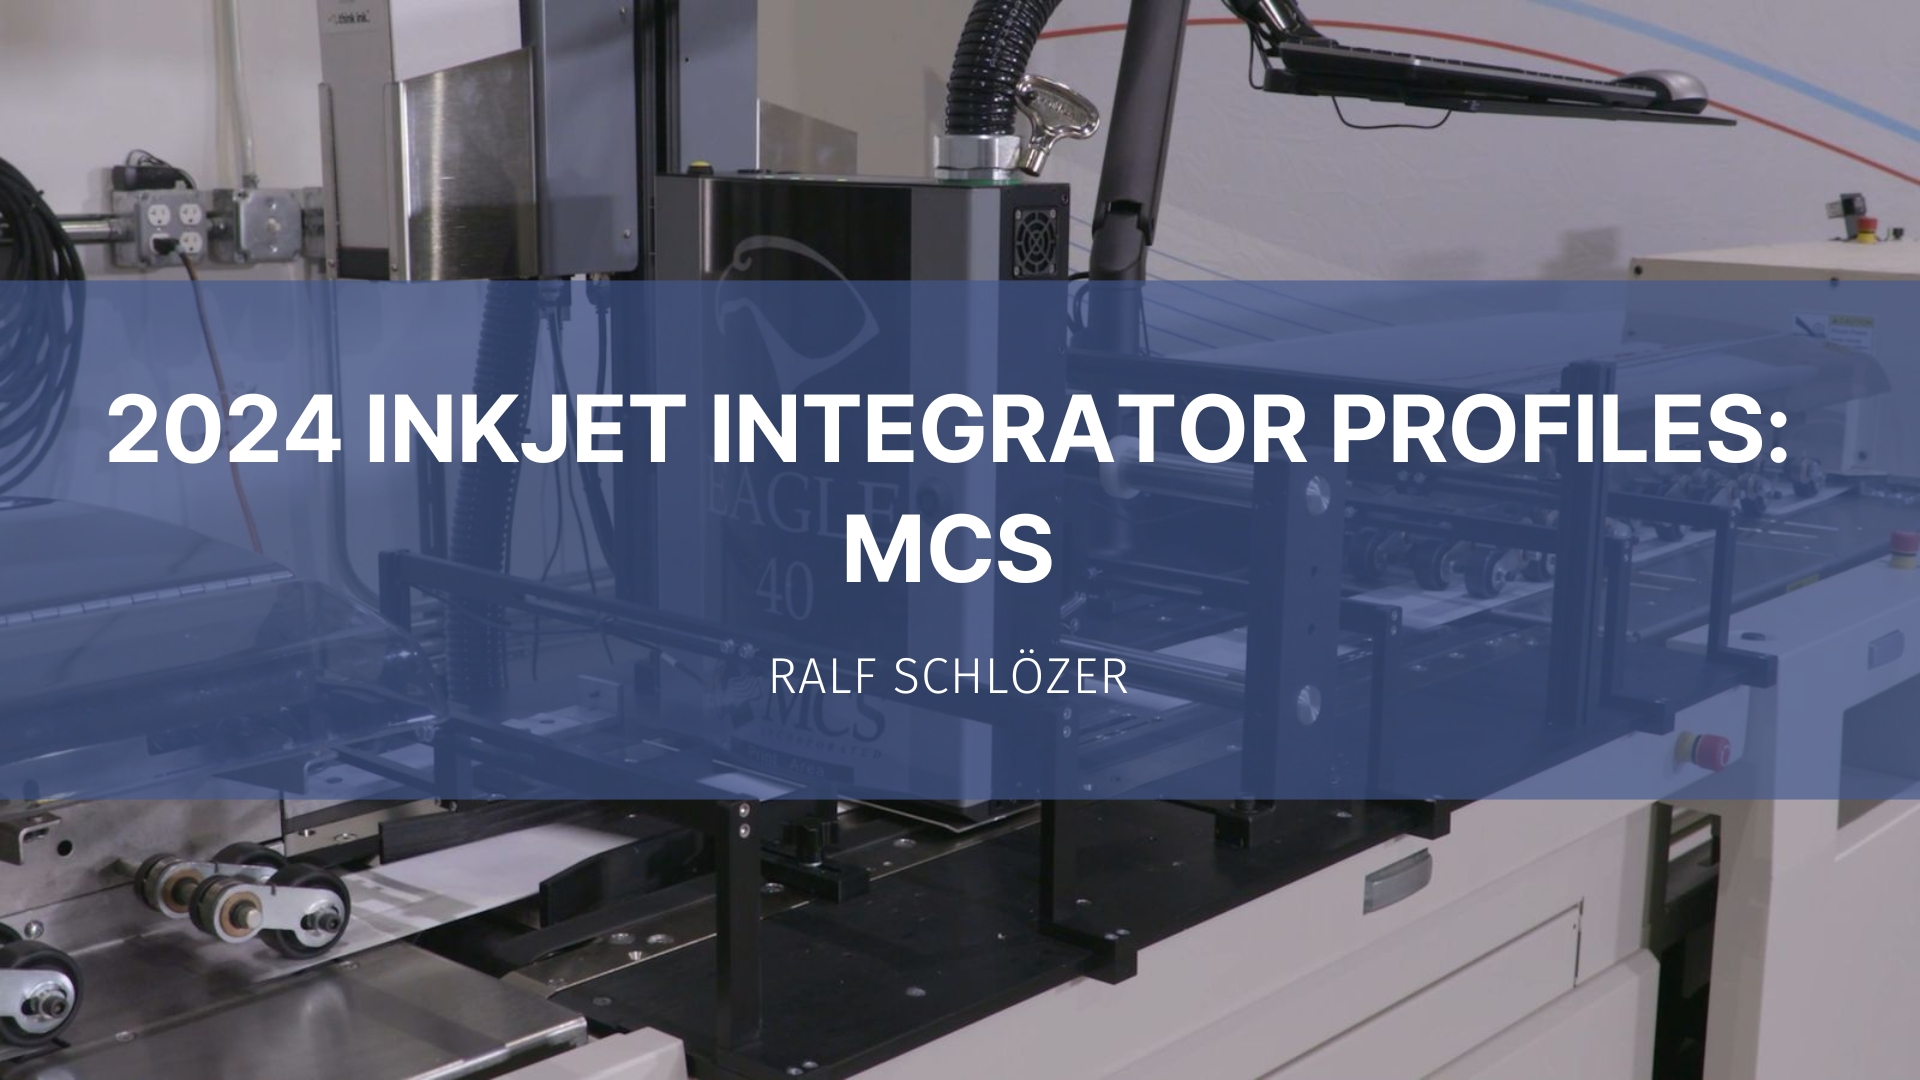 Featured image for “2024 Inkjet Integrator Profiles: MCS”